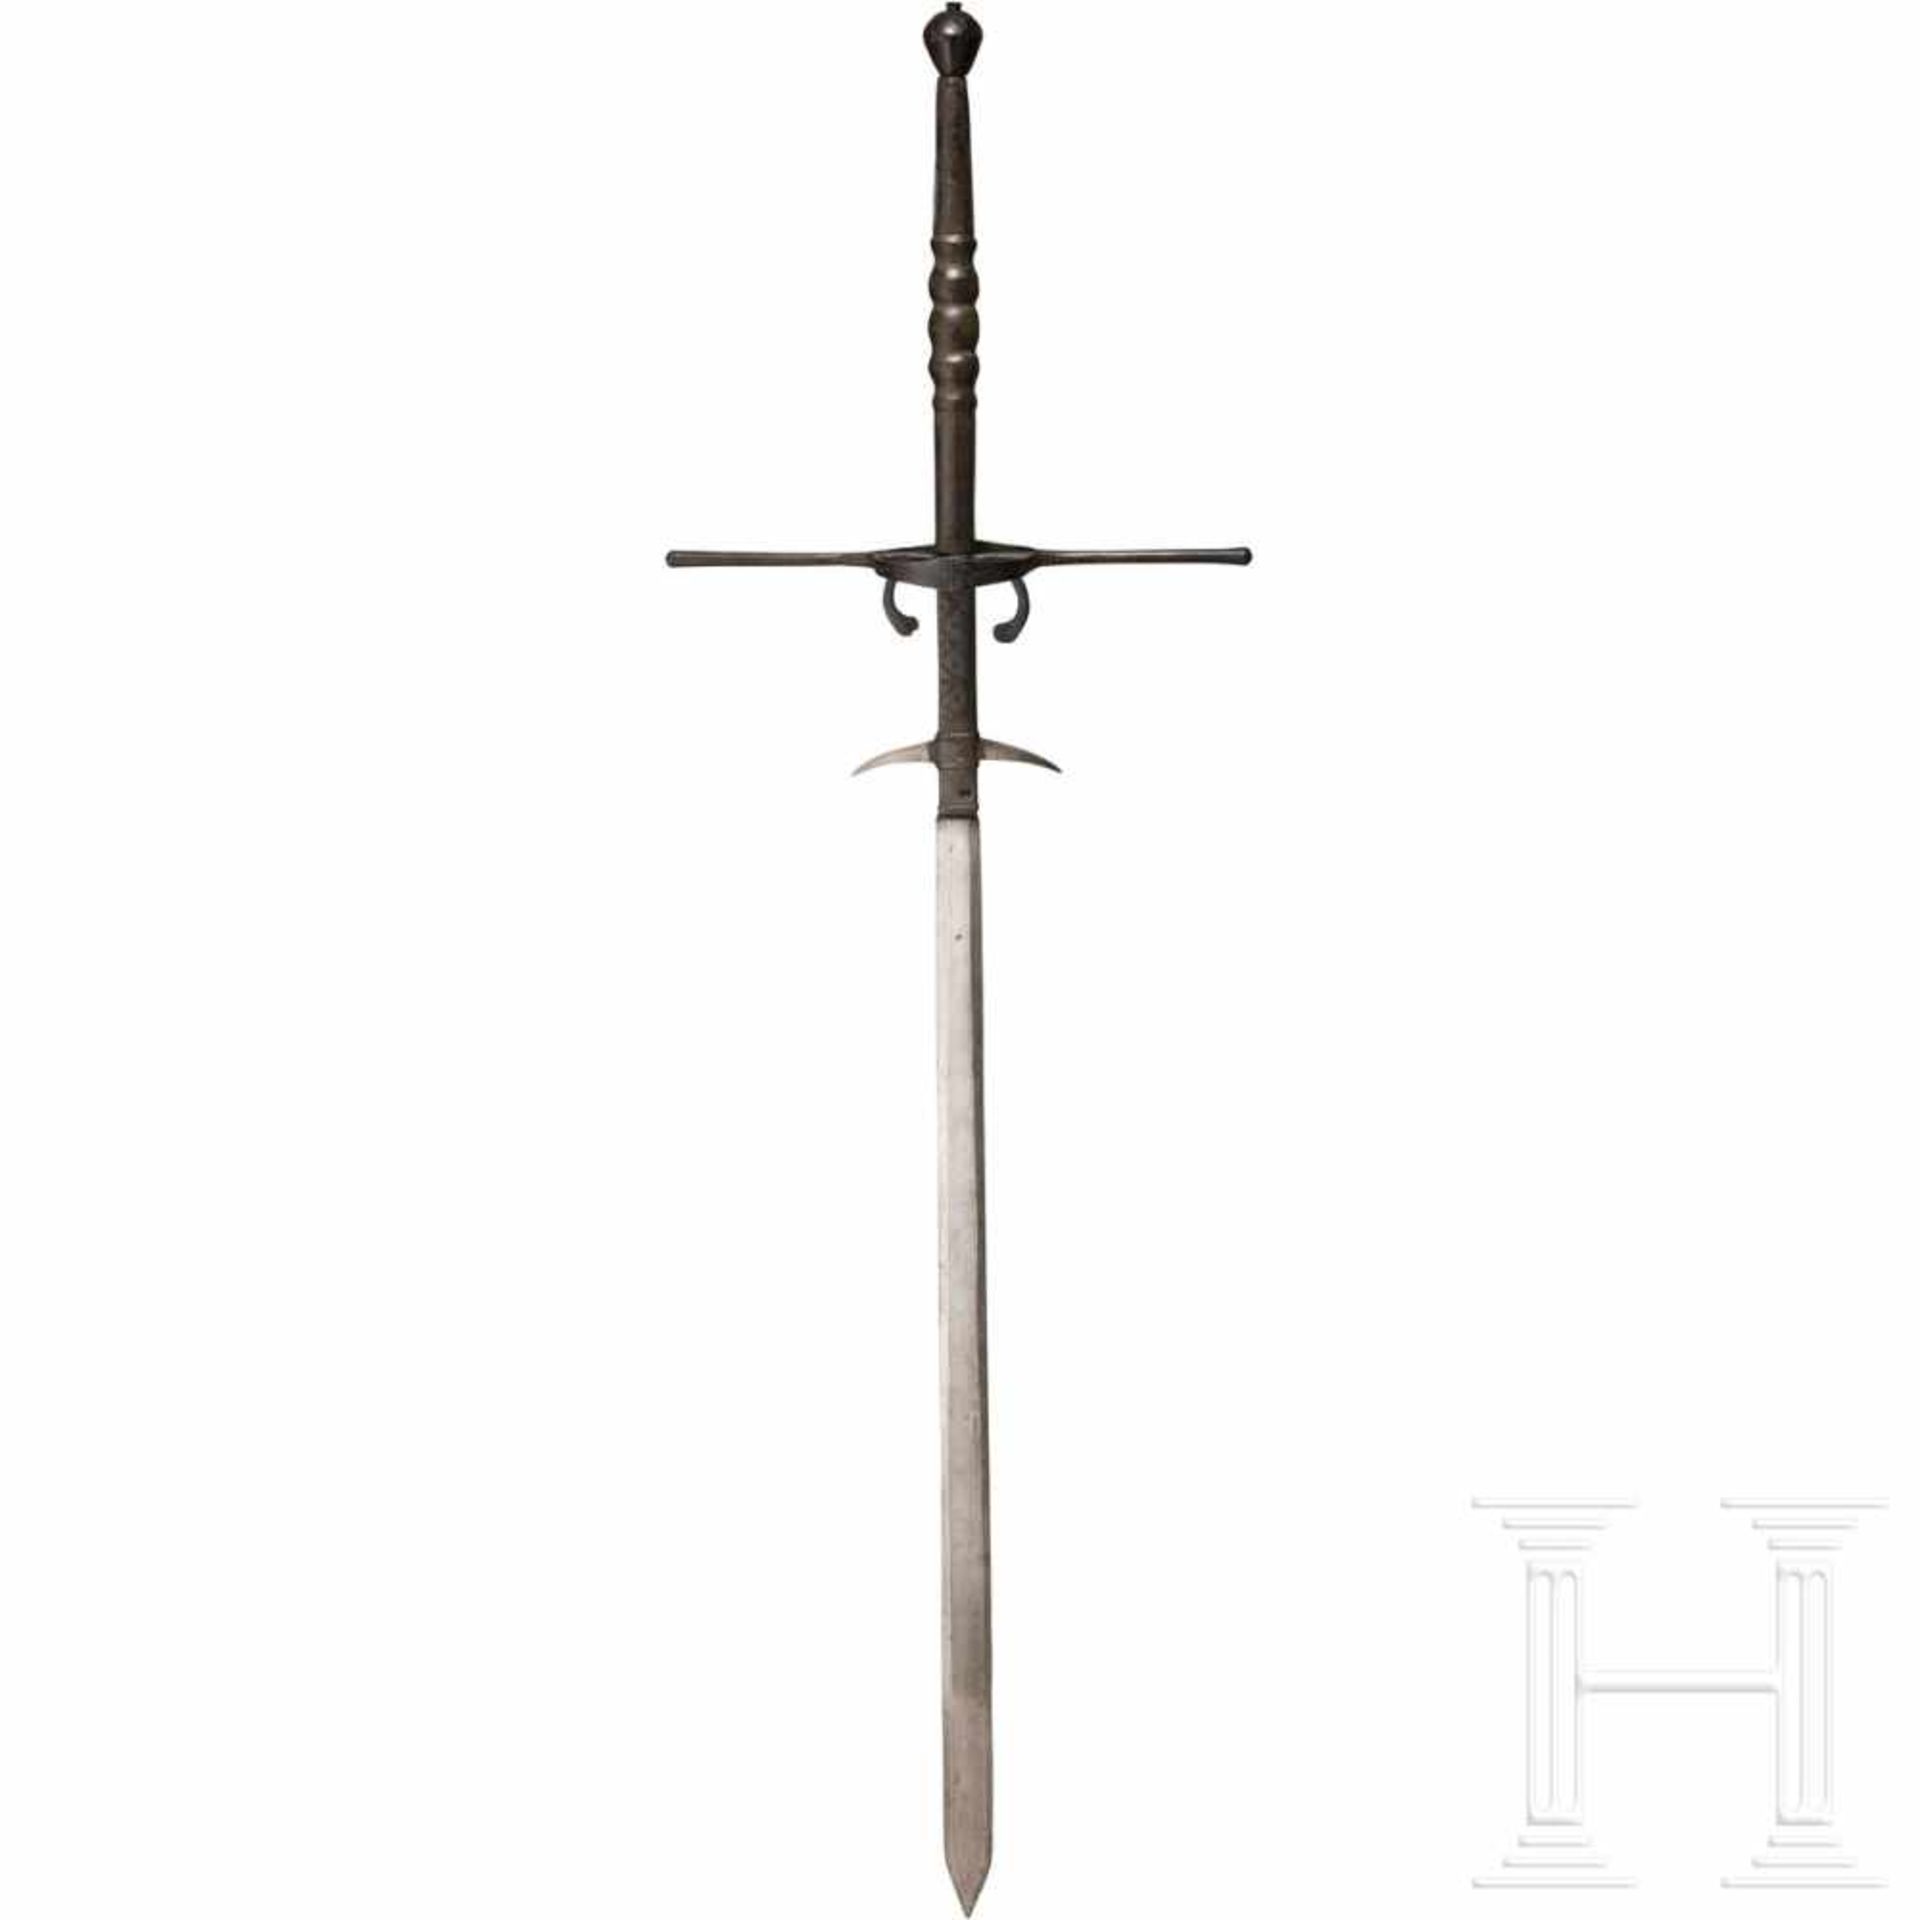 A significant South German two-handed sword, circa 1580The double-edged, conical blade widening